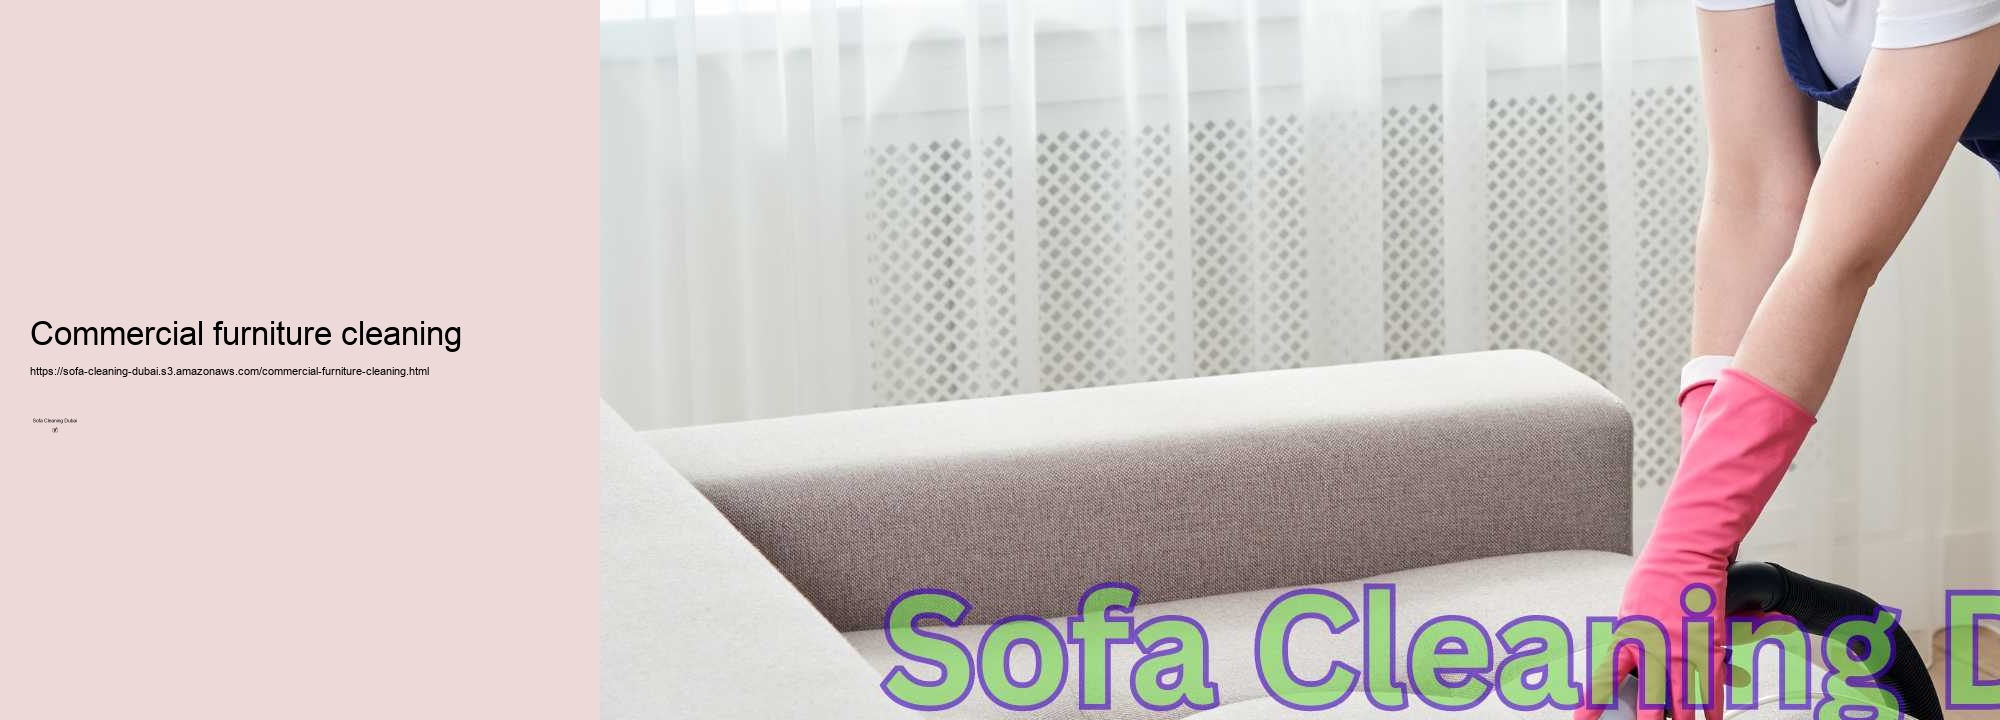 Commercial furniture cleaning